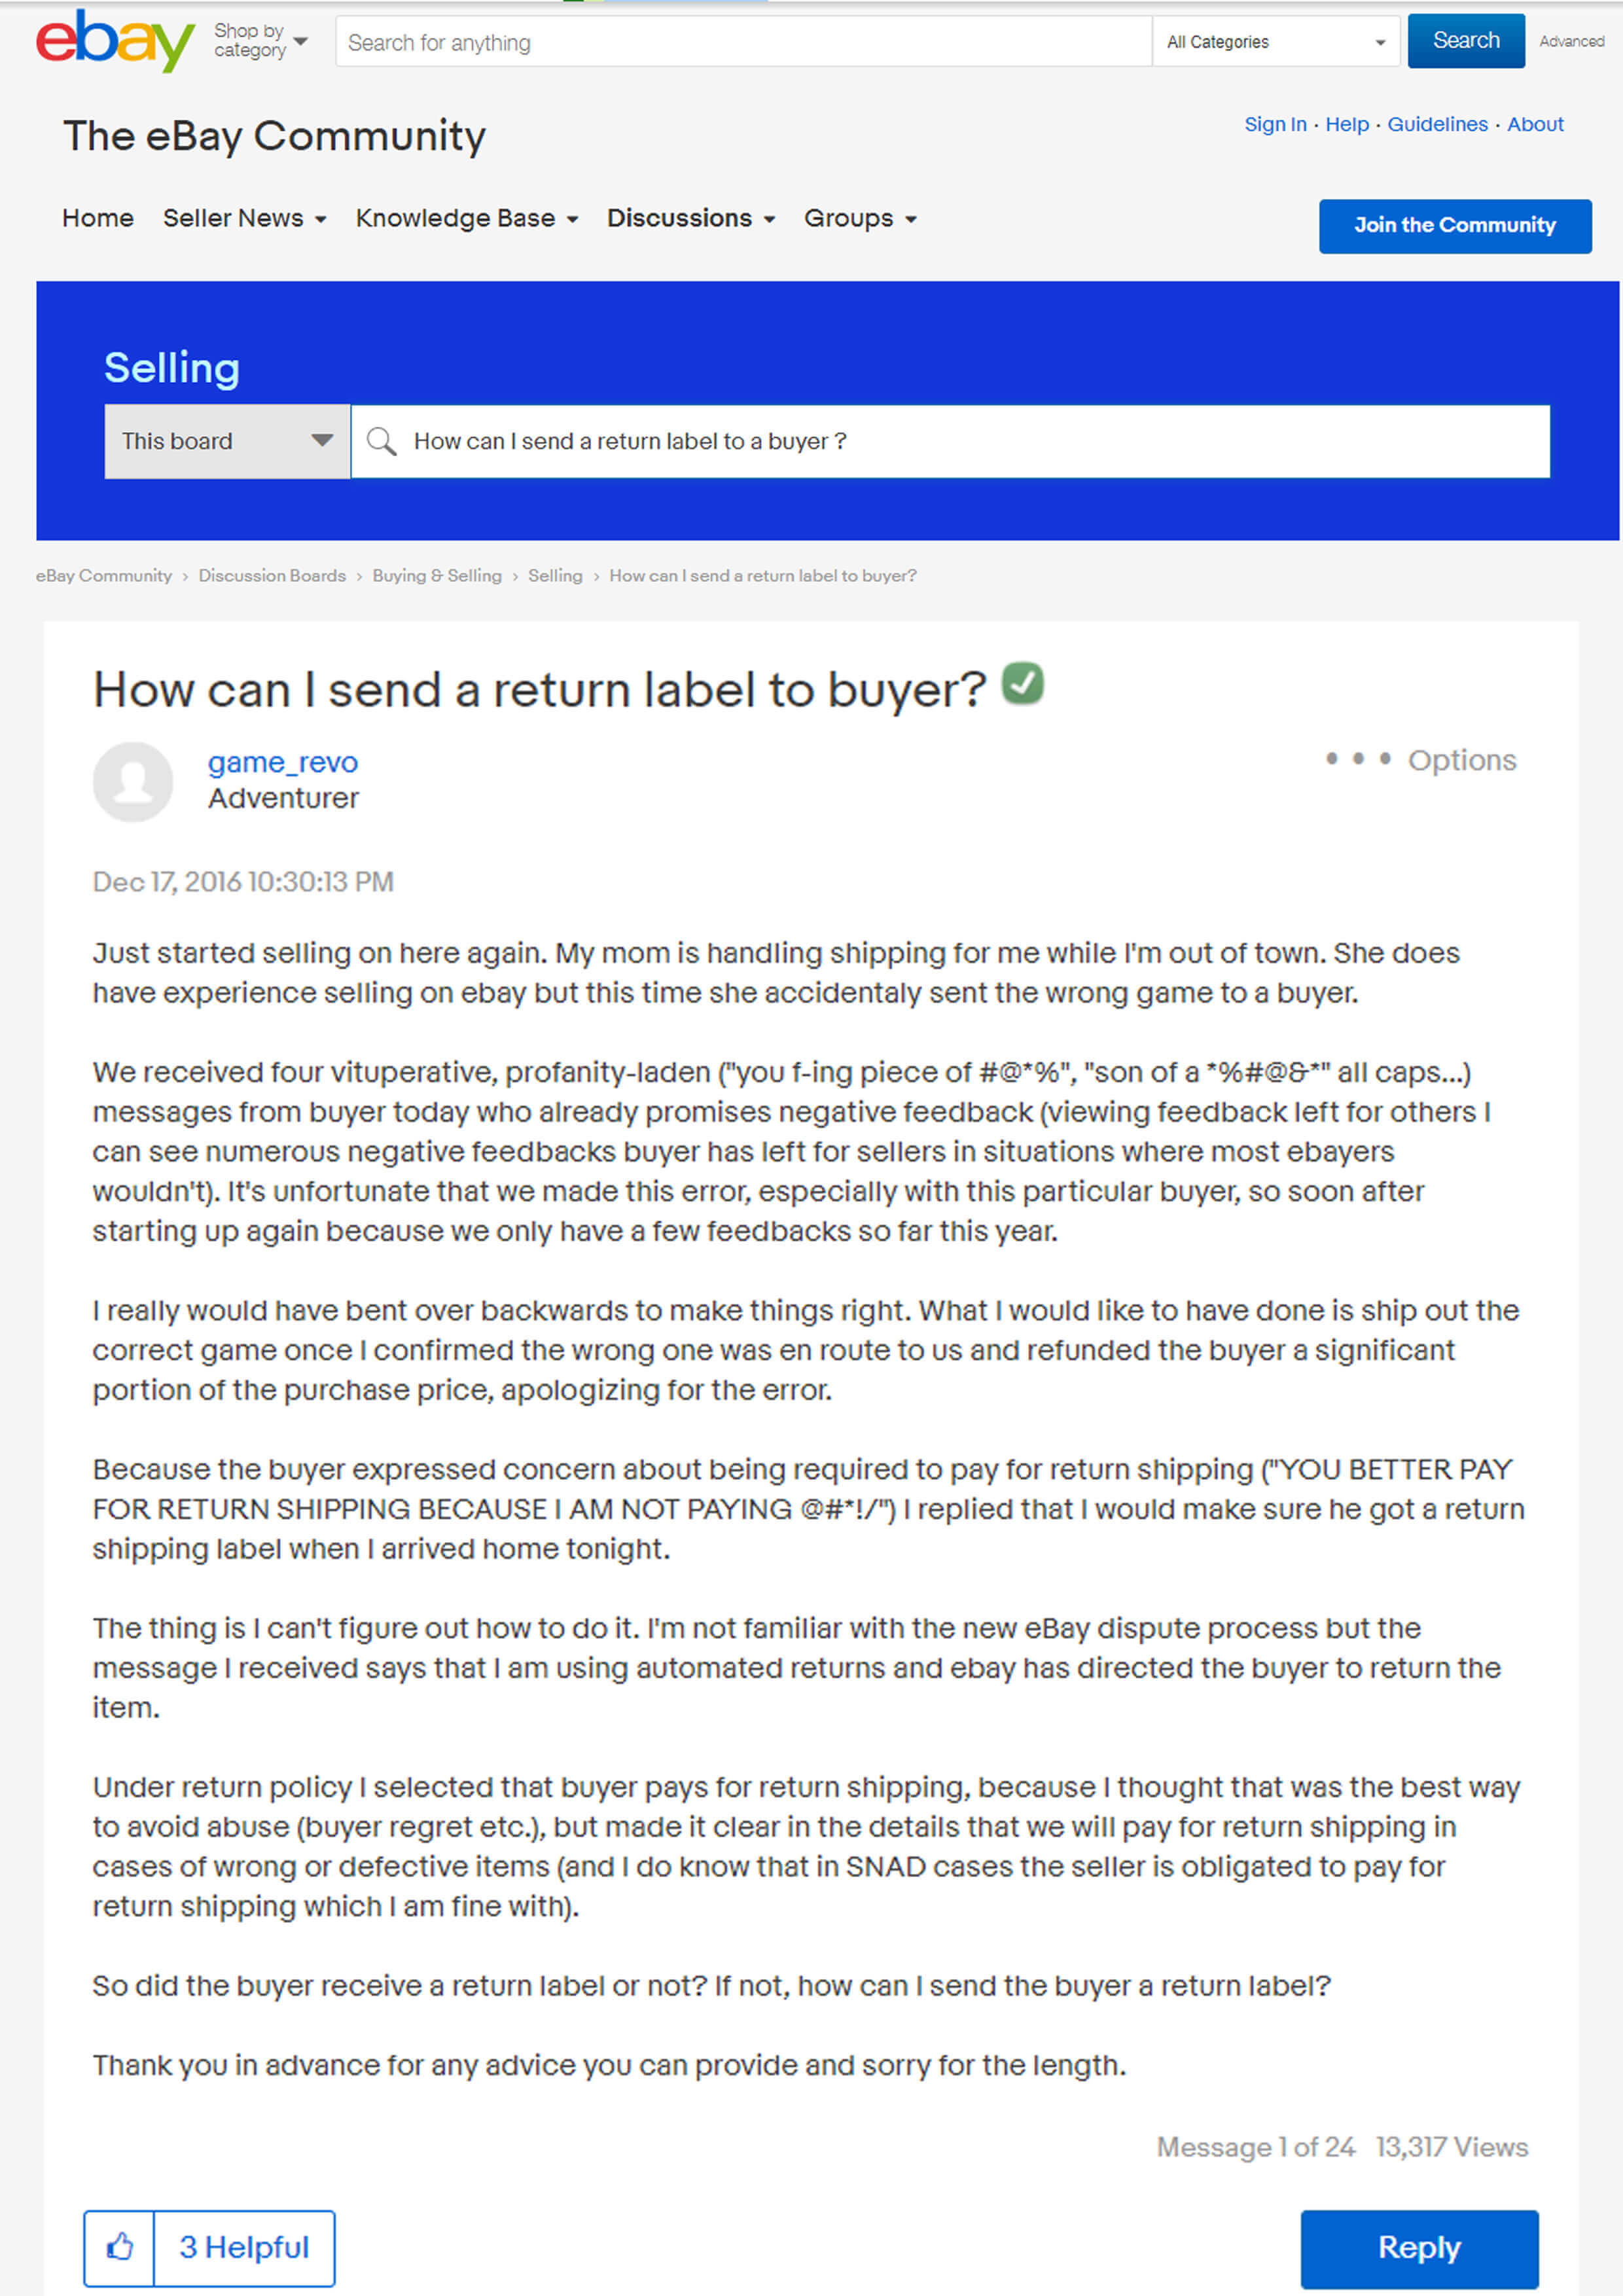 How to Reach eBay Customer Service in Seconds - Secrets Revealed!